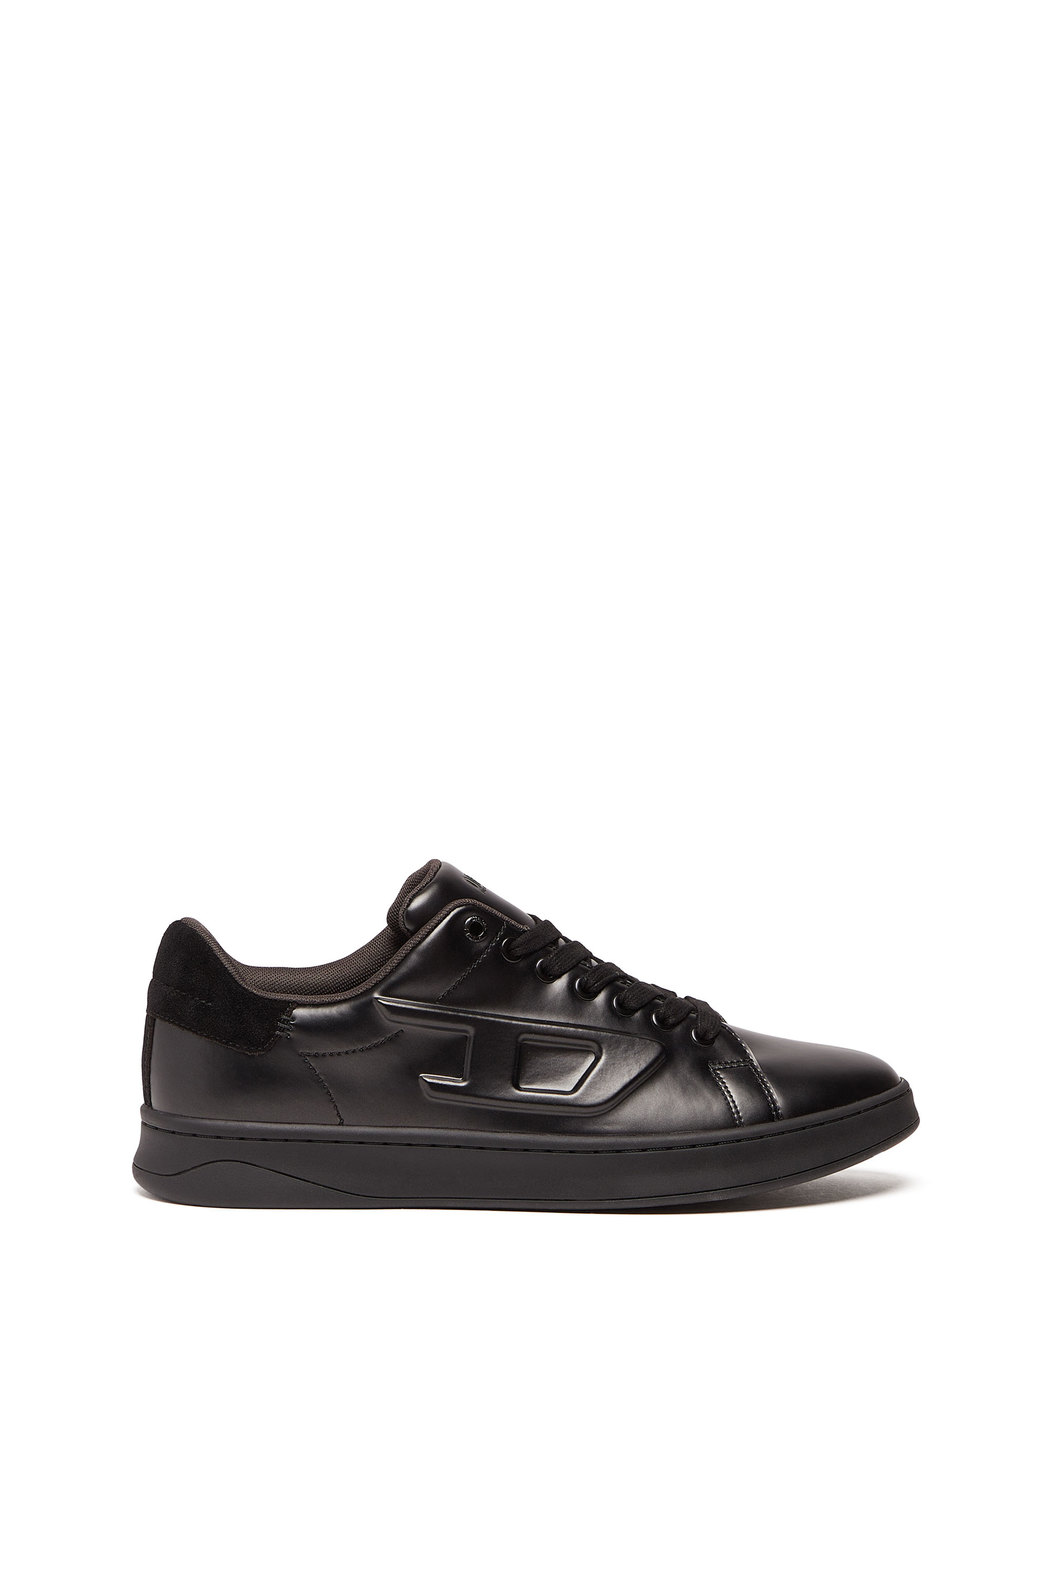 S-Athene Low - Metallic sneakers with embossed D logo